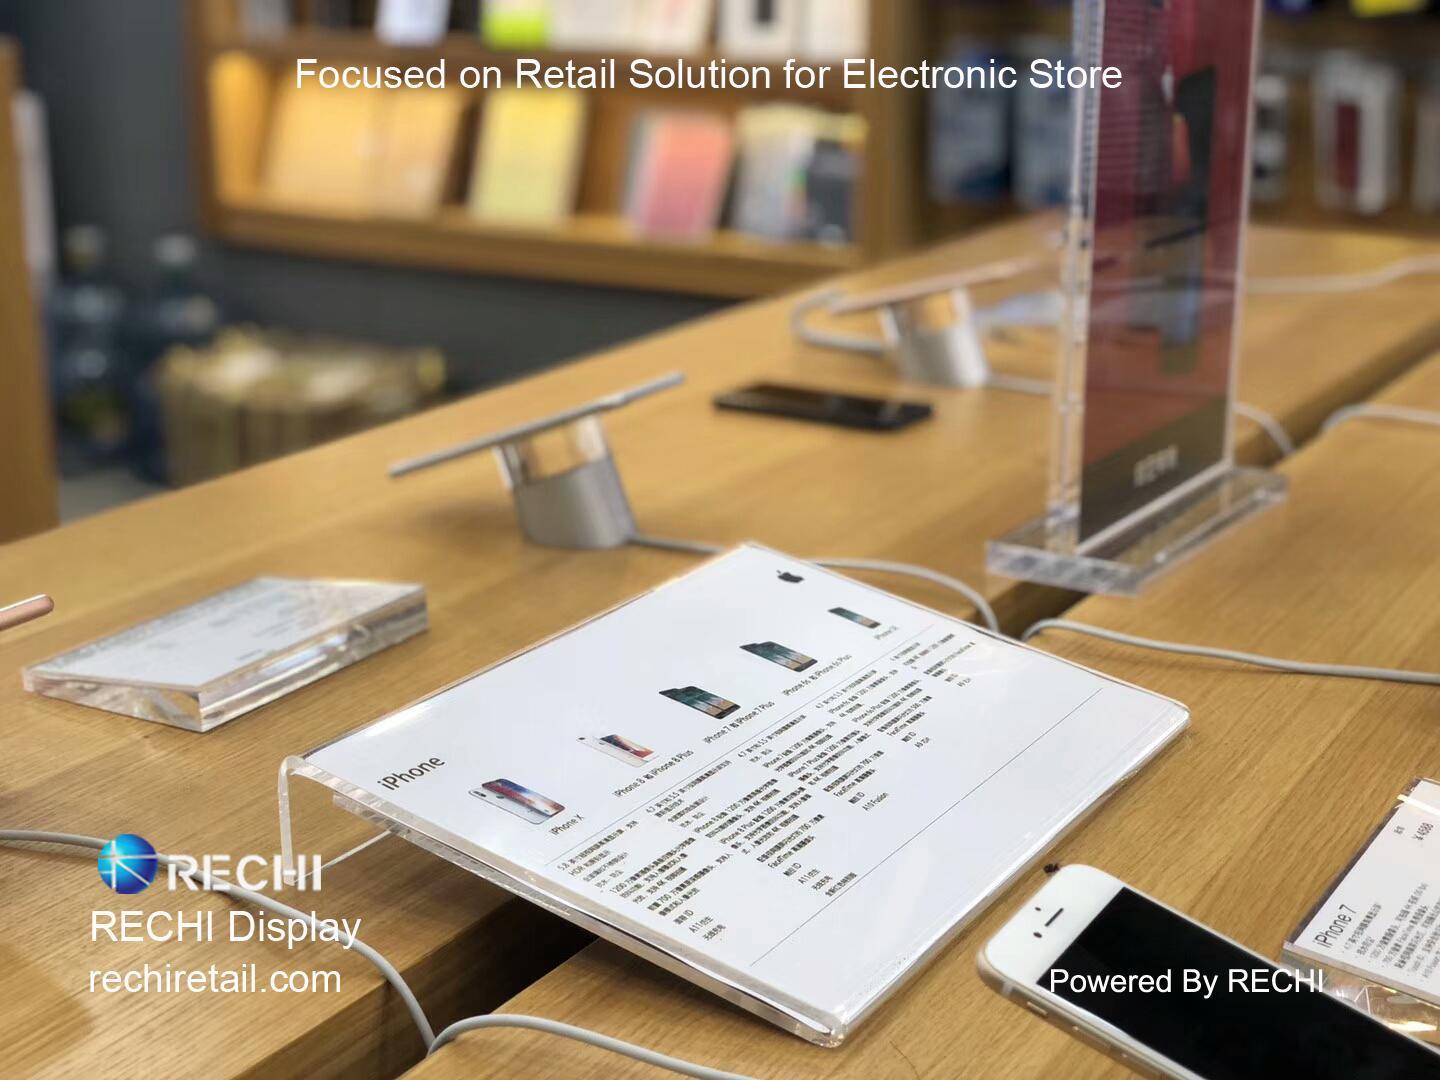 RECHI Merchandising Security Solution for Apple iPhone